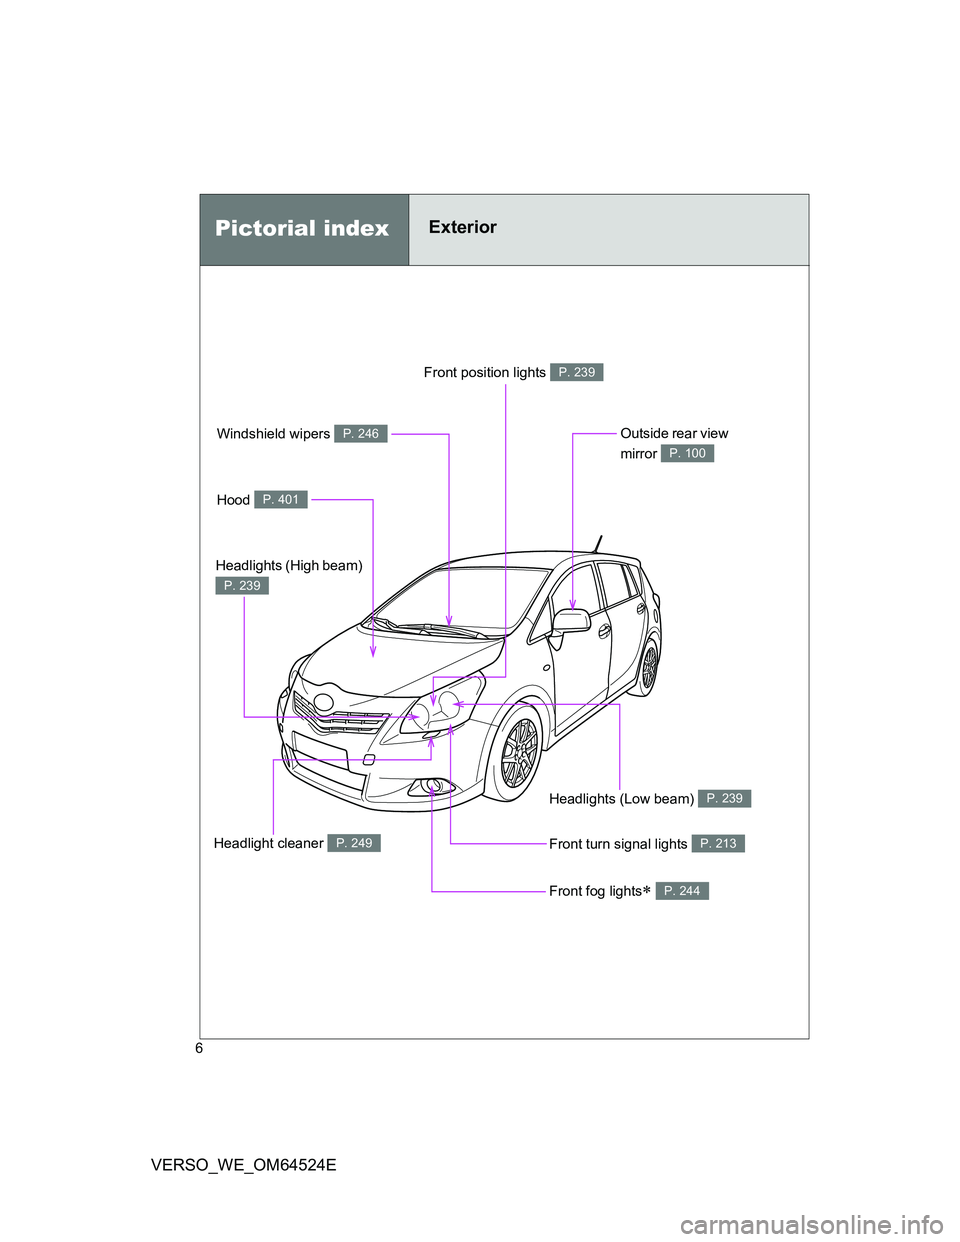 TOYOTA VERSO 2011  Owners Manual 6
VERSO_WE_OM64524E
Headlights (Low beam) P. 239
Pictorial indexExterior
Front fog lights P. 244
Front turn signal lights P. 213
Hood P. 401
Windshield wipers P. 246Outside rear view 
mirror 
P. 10